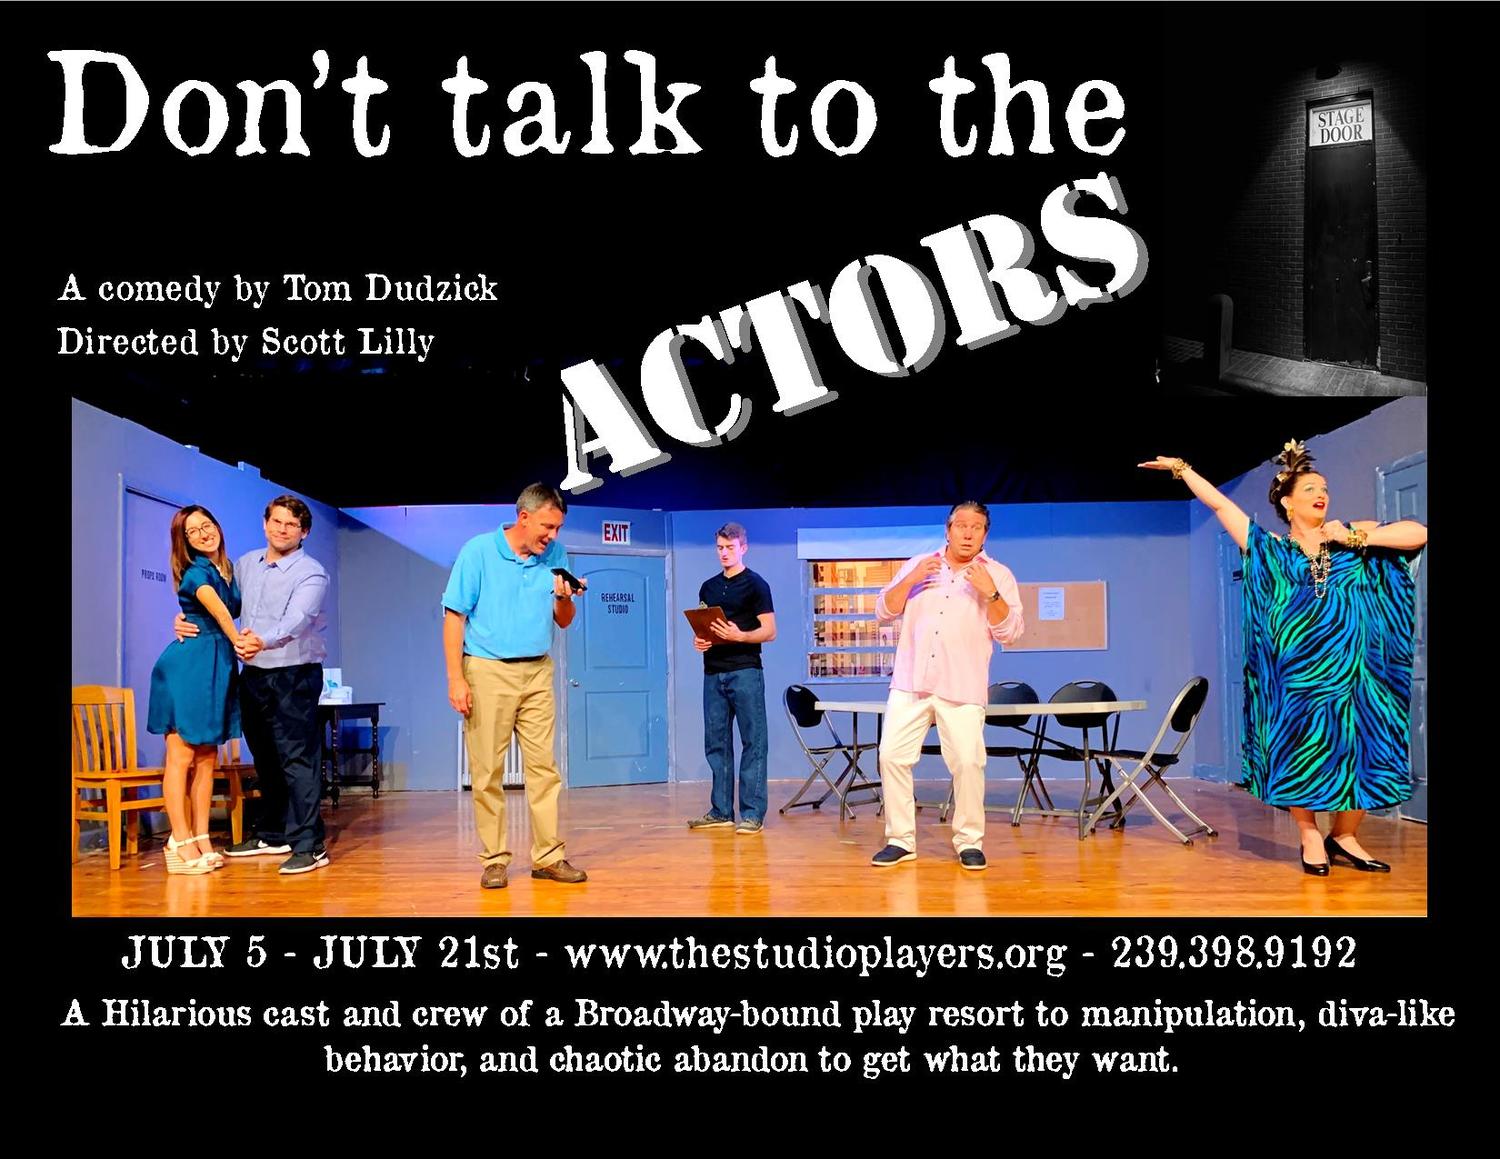 Don't talk to the Actors running now through July 21st! 1